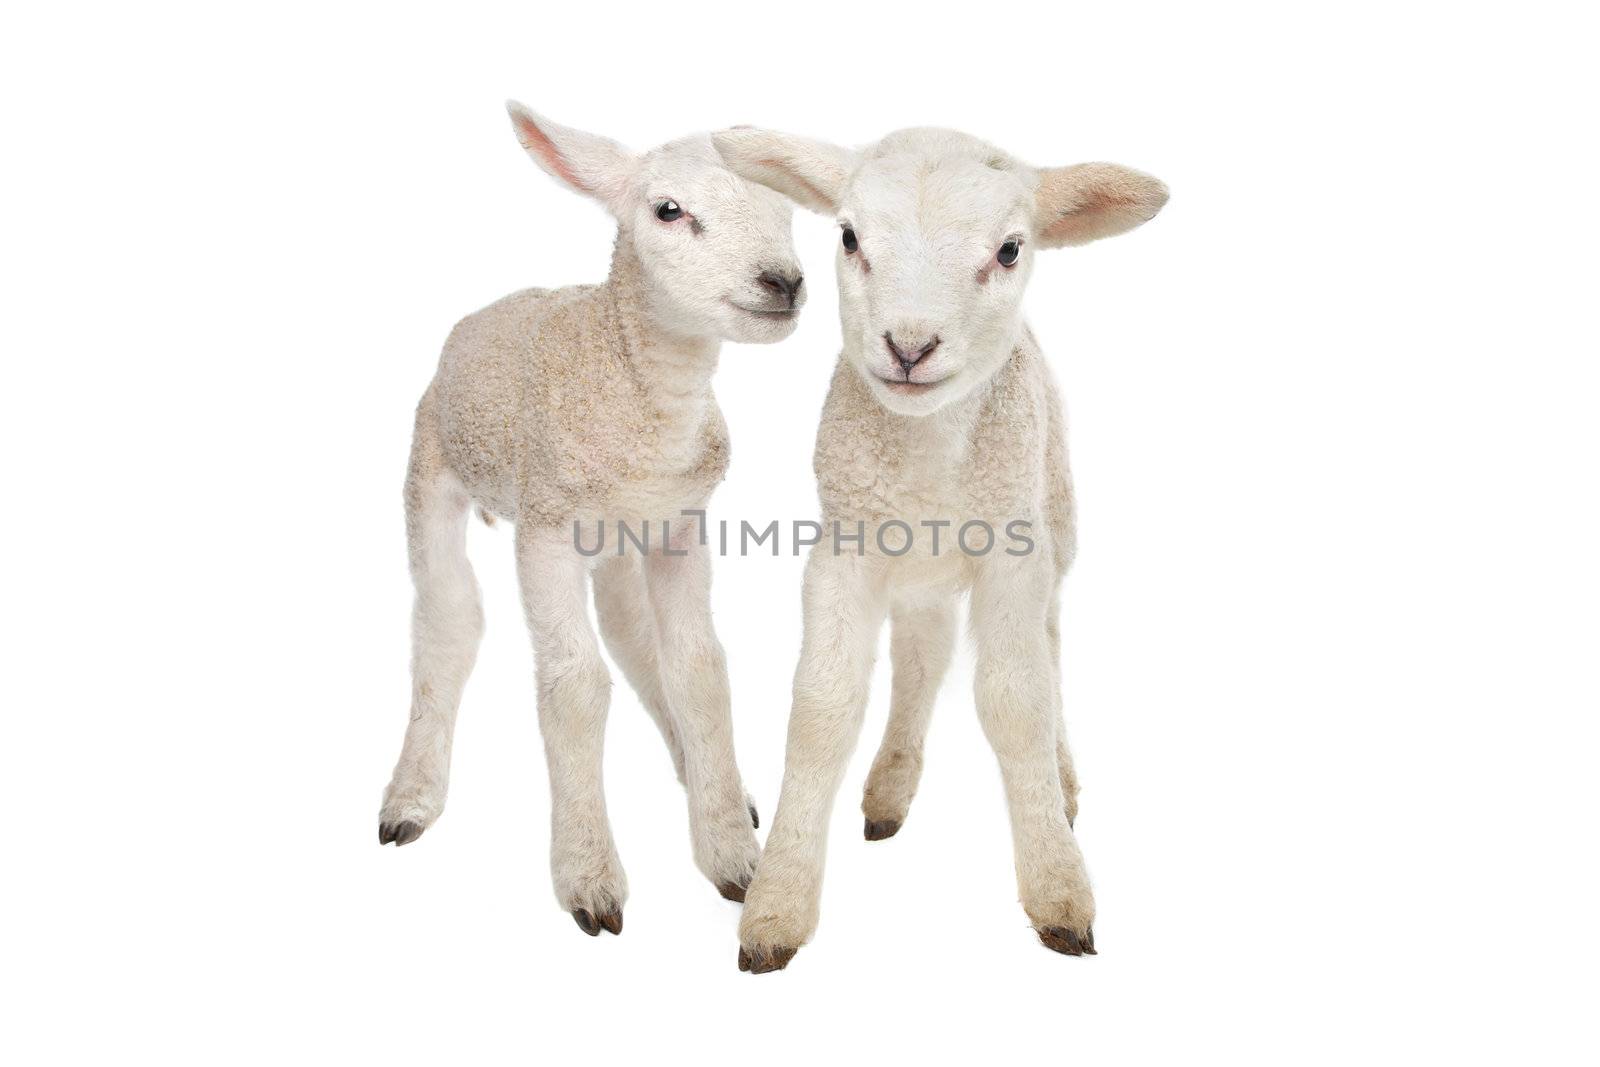 Two little lambs in front of a white background